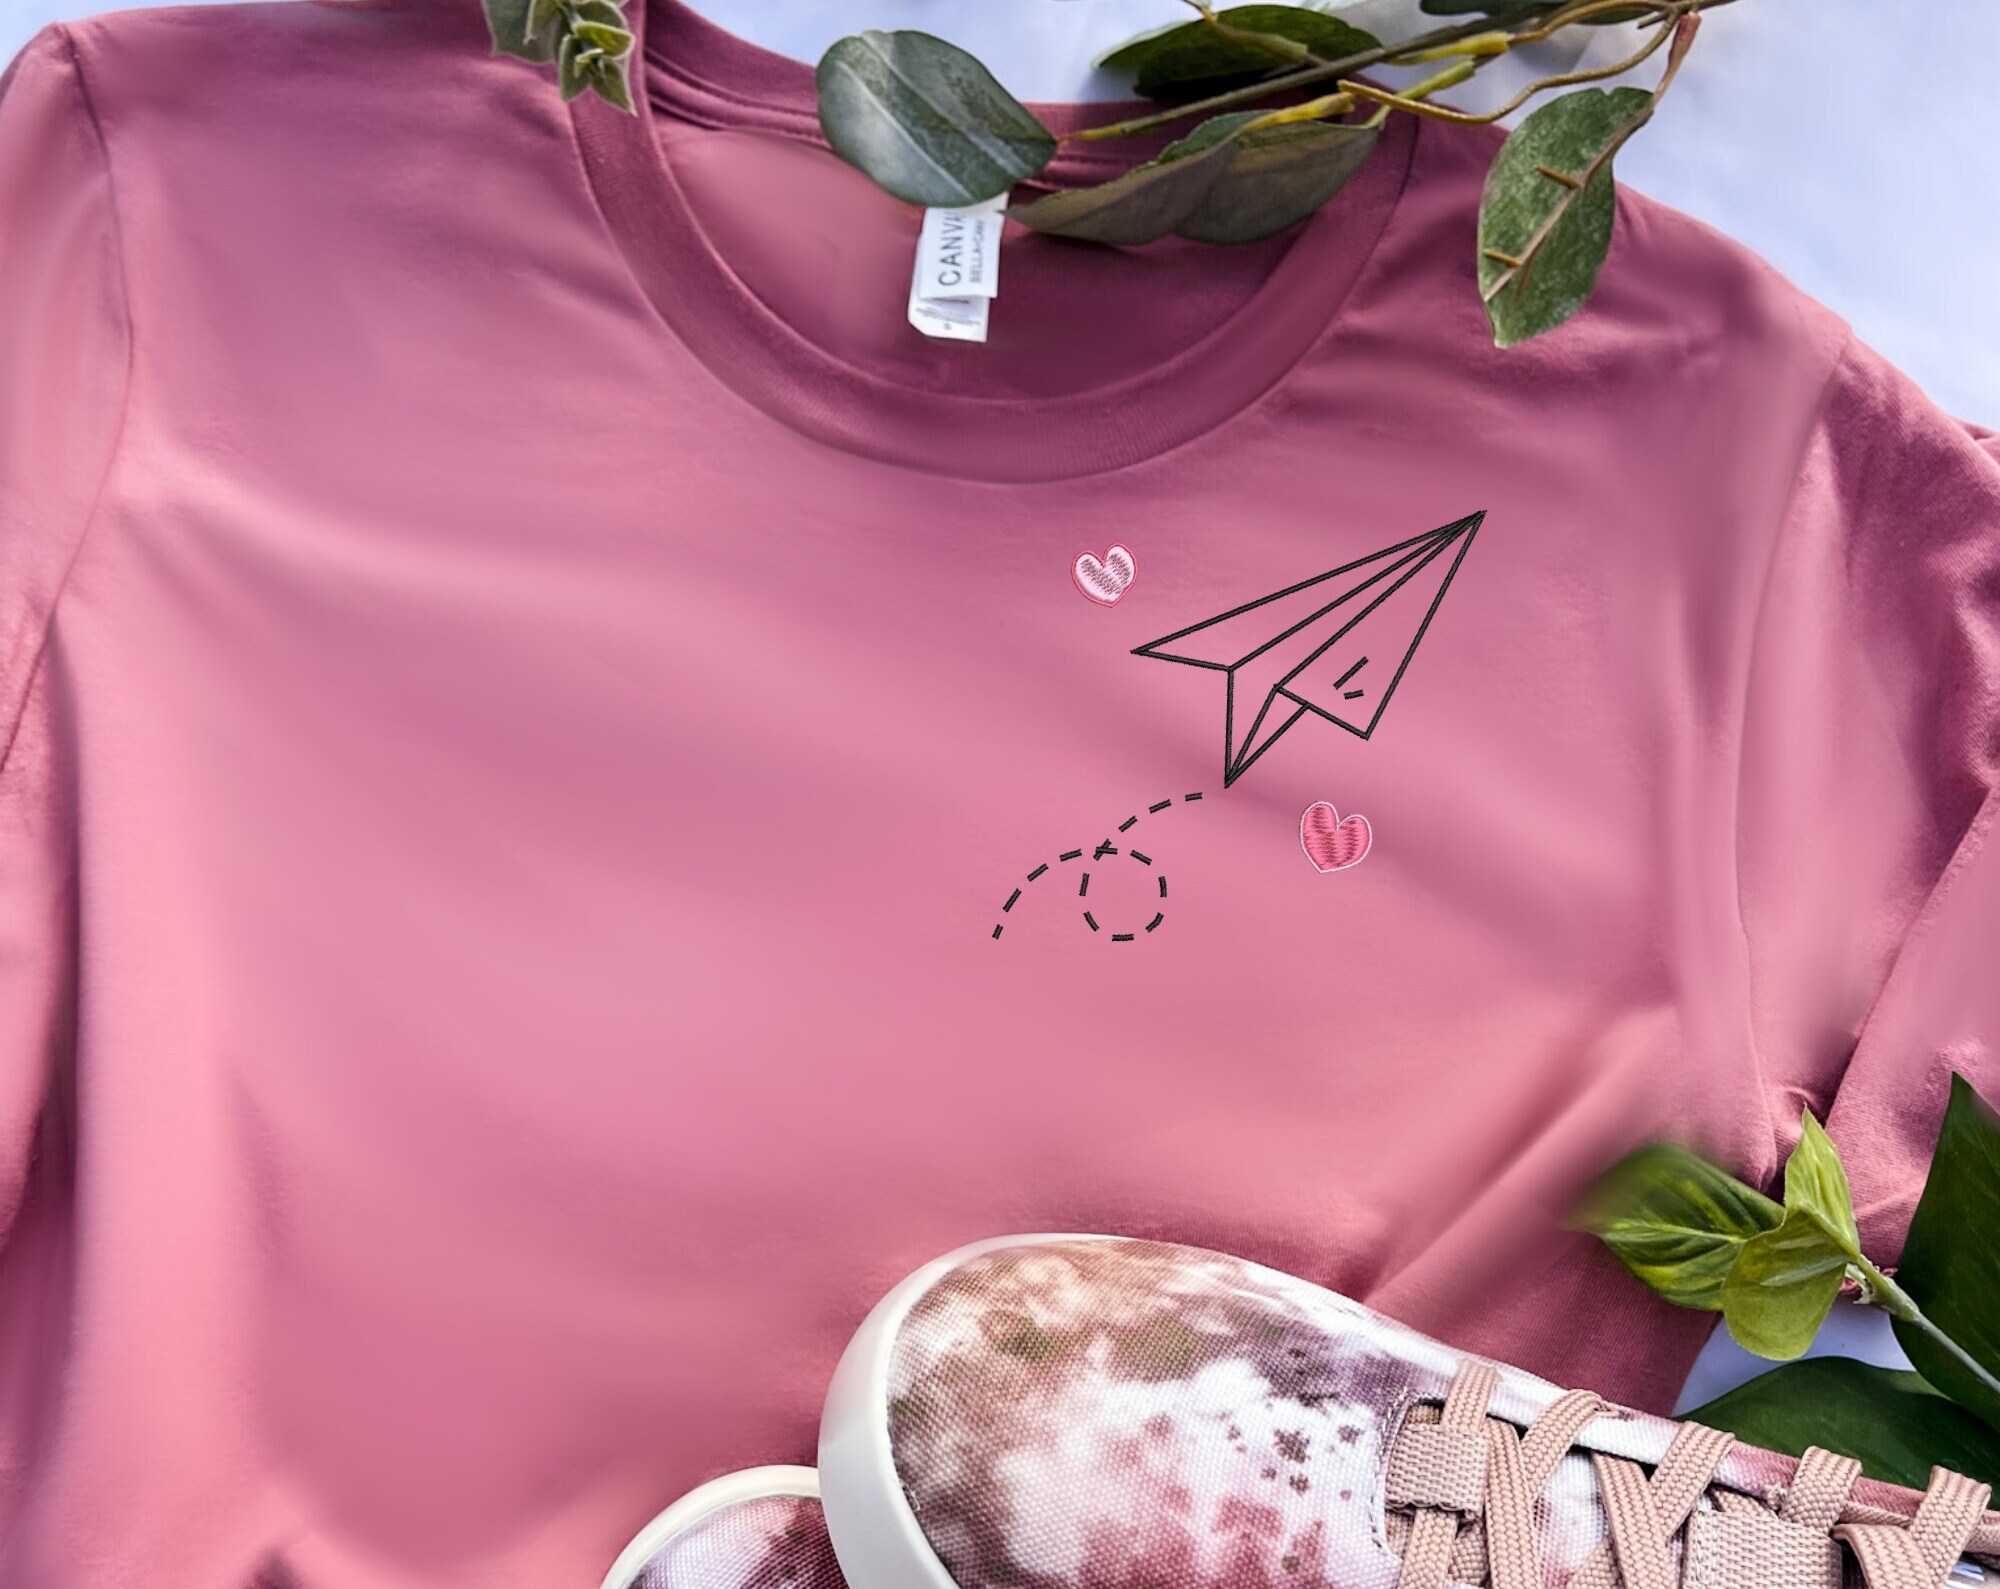 Discover Paper Plane Tee, T-Shirt for her